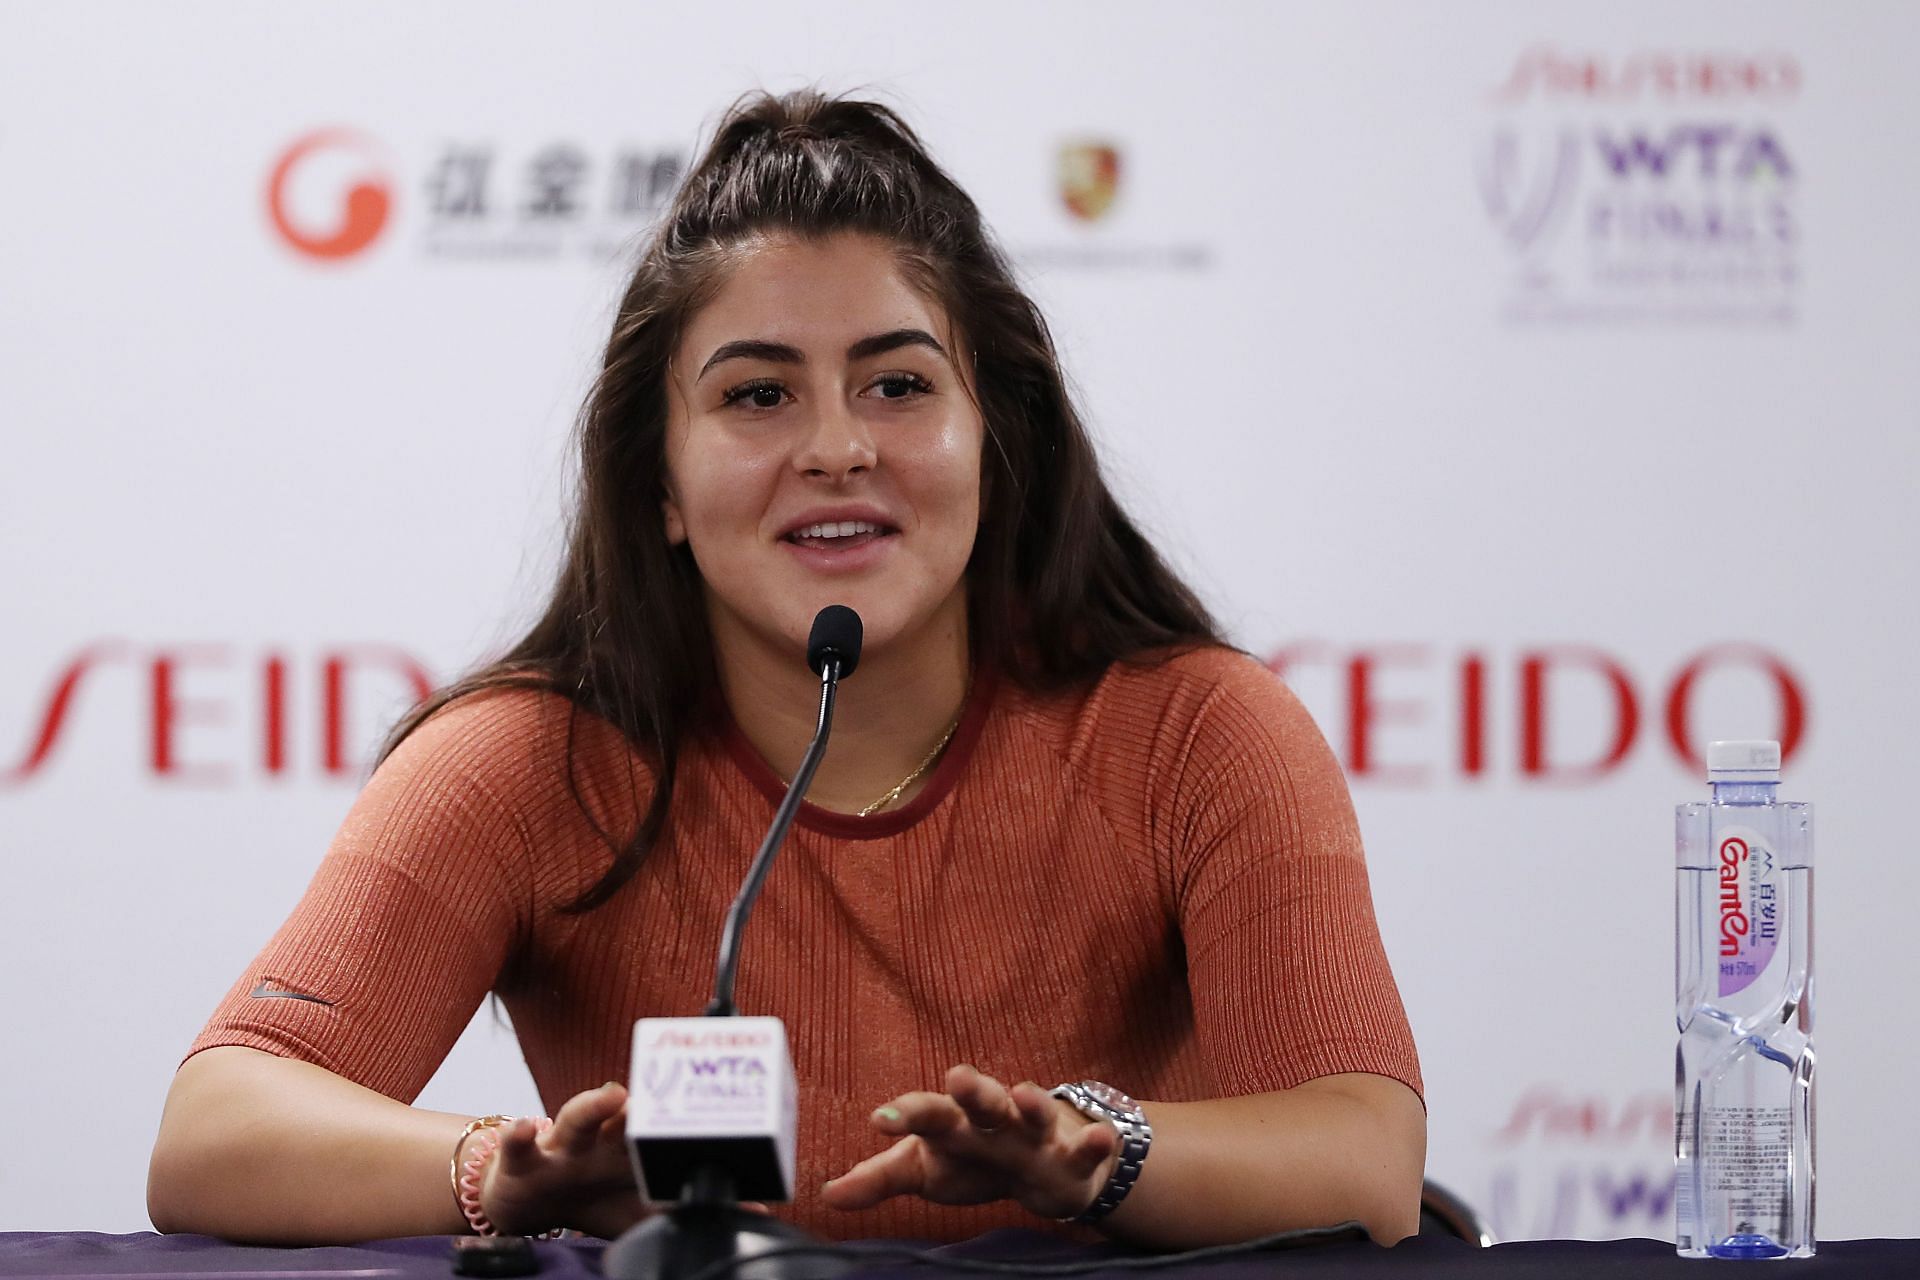 Bianca Andreescu overwhelmed by the support to Tennis Canada